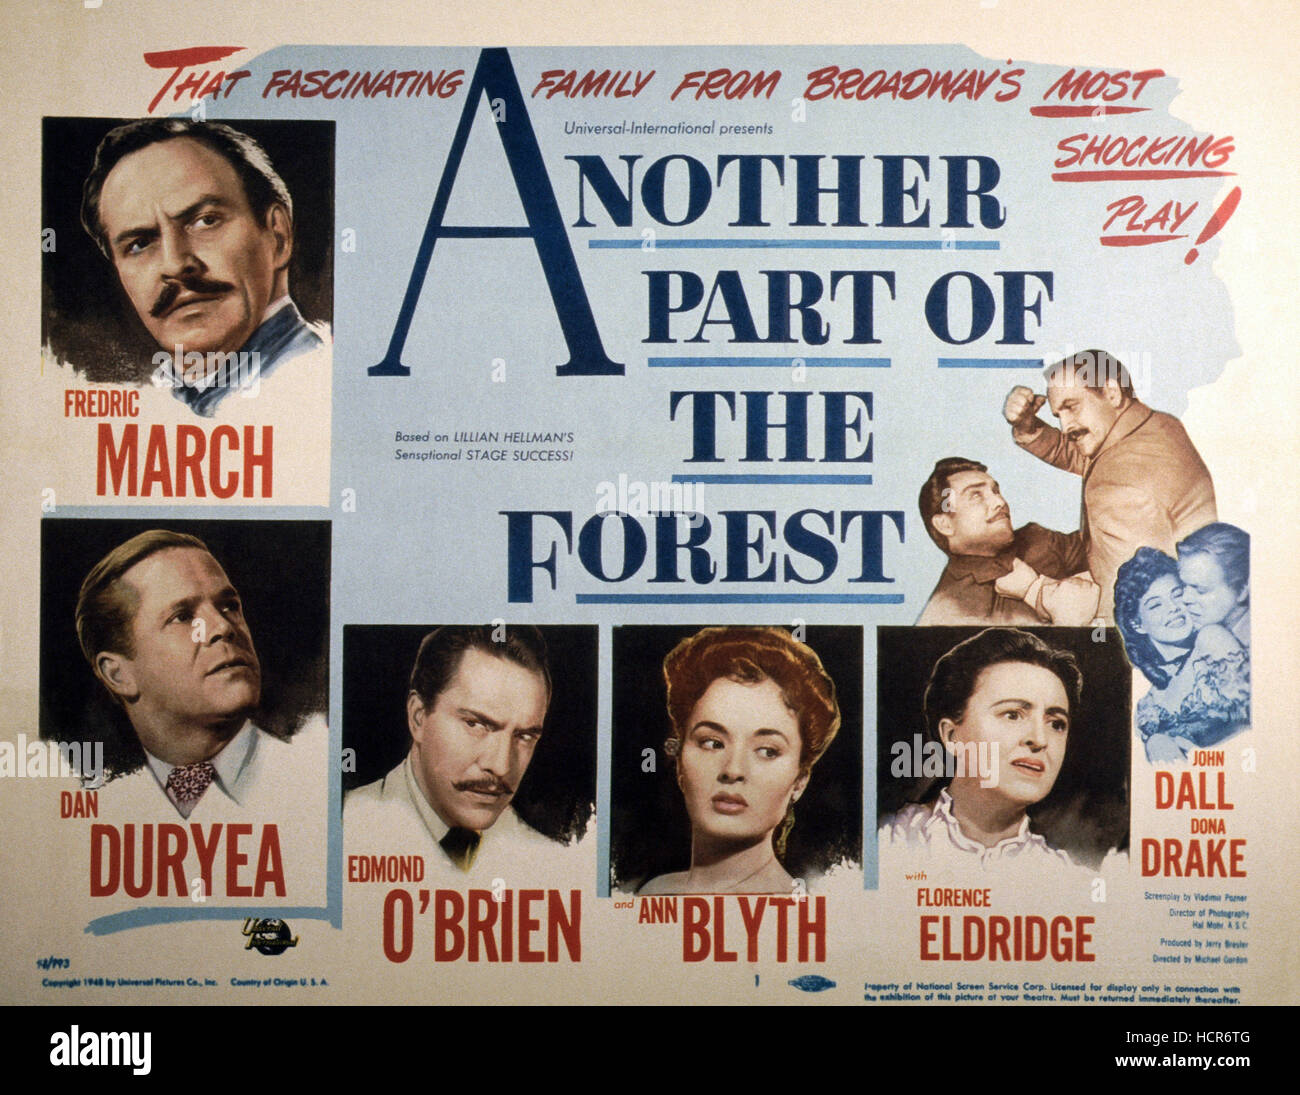 ANOTHER PART OF THE FOREST, from left: Fredric March (top), Dan Duryea, Edmond O'Brien, Ann Blyth, Florence Edlridge, 1948 Stock Photo